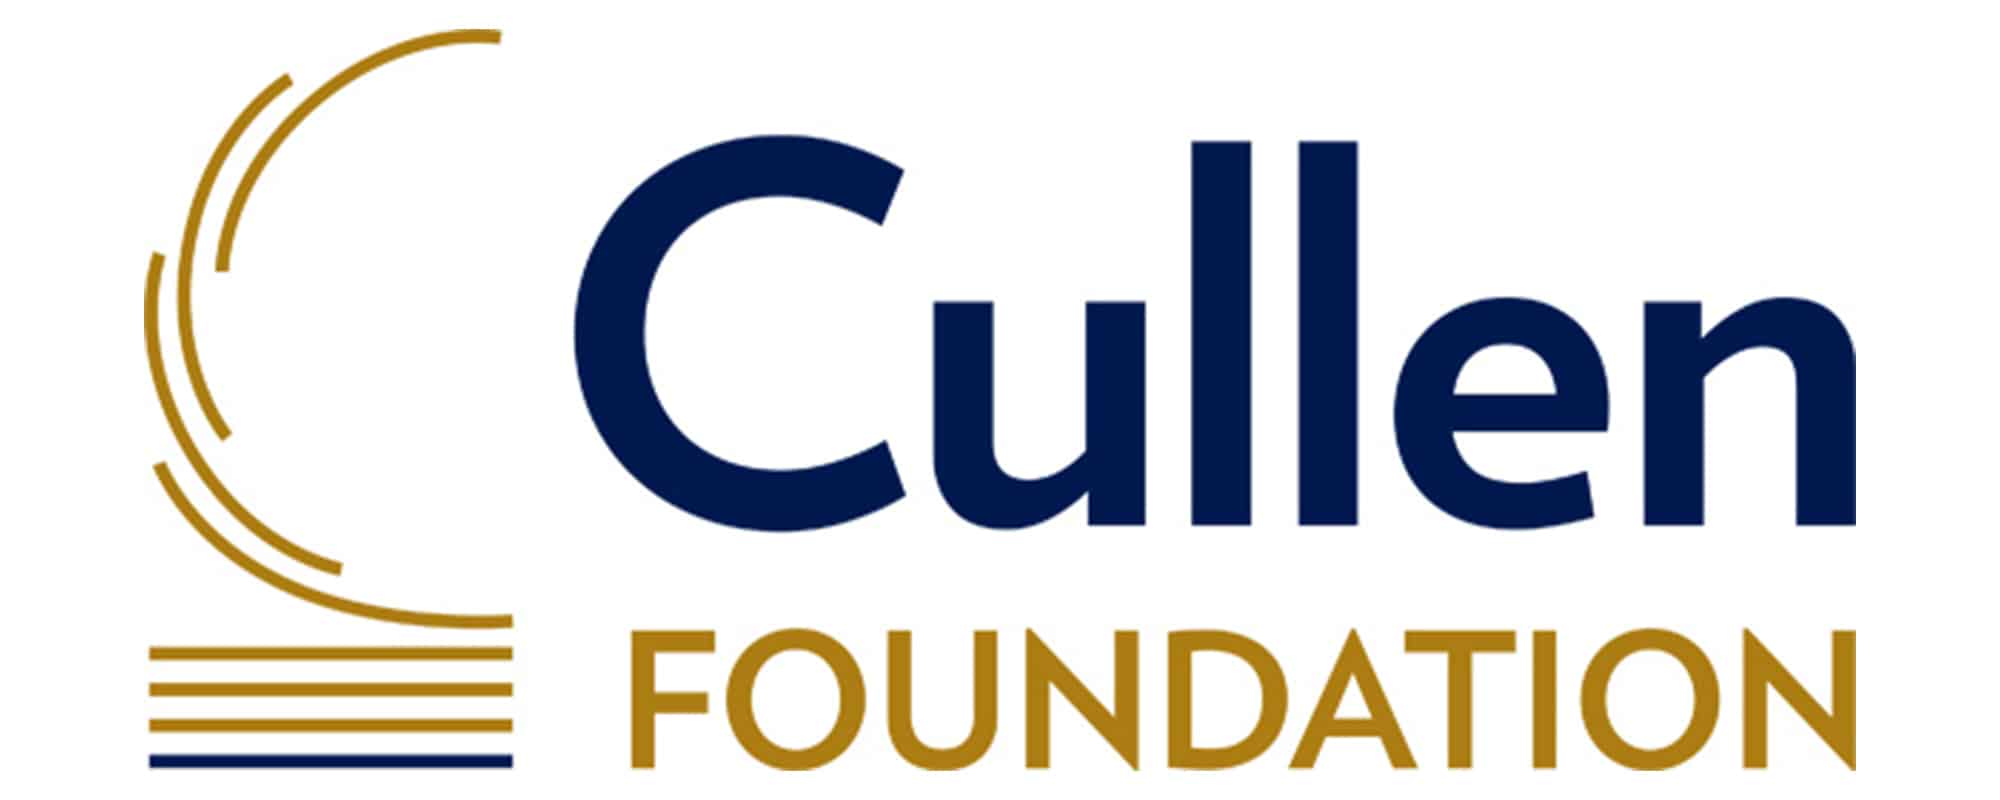 The Cullen Foundation supports Second Generation Theatre